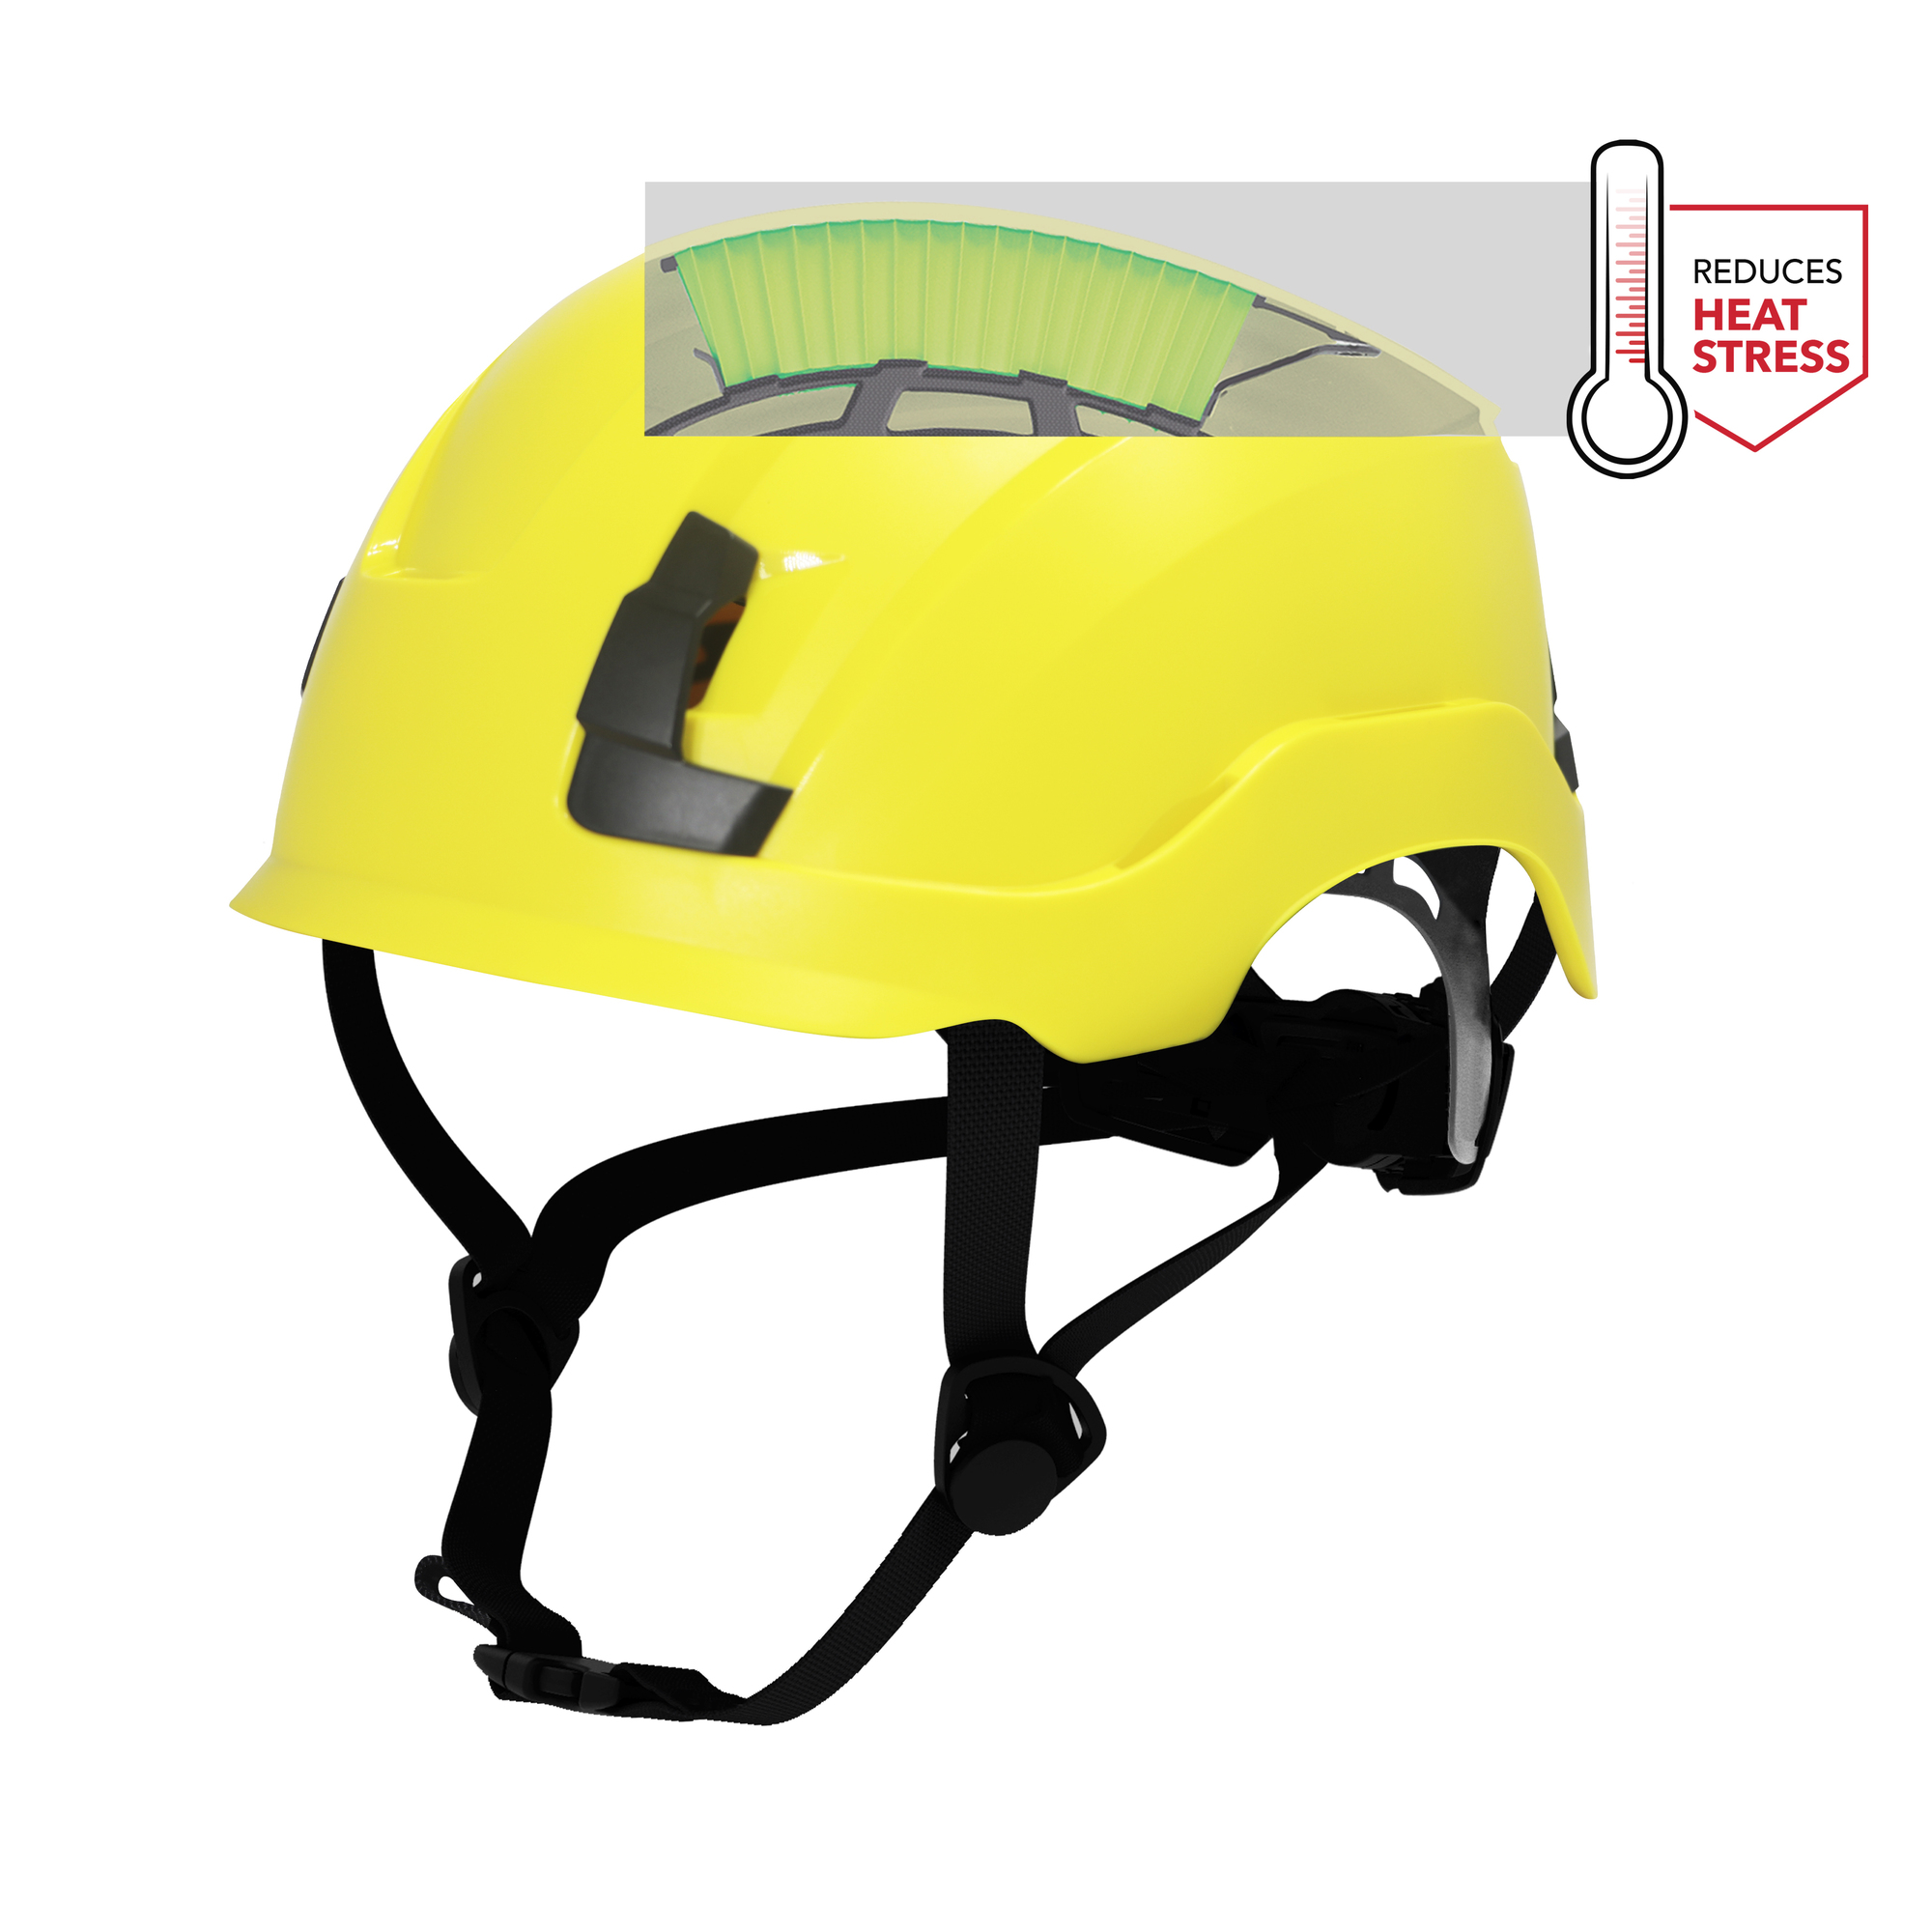 General Electric, Low-Profile Yellow GH400 Safety Helmet Vented, Hard Hat Style Helmet, Hat Size Adjustable, Color Yellow, Model GH400Y